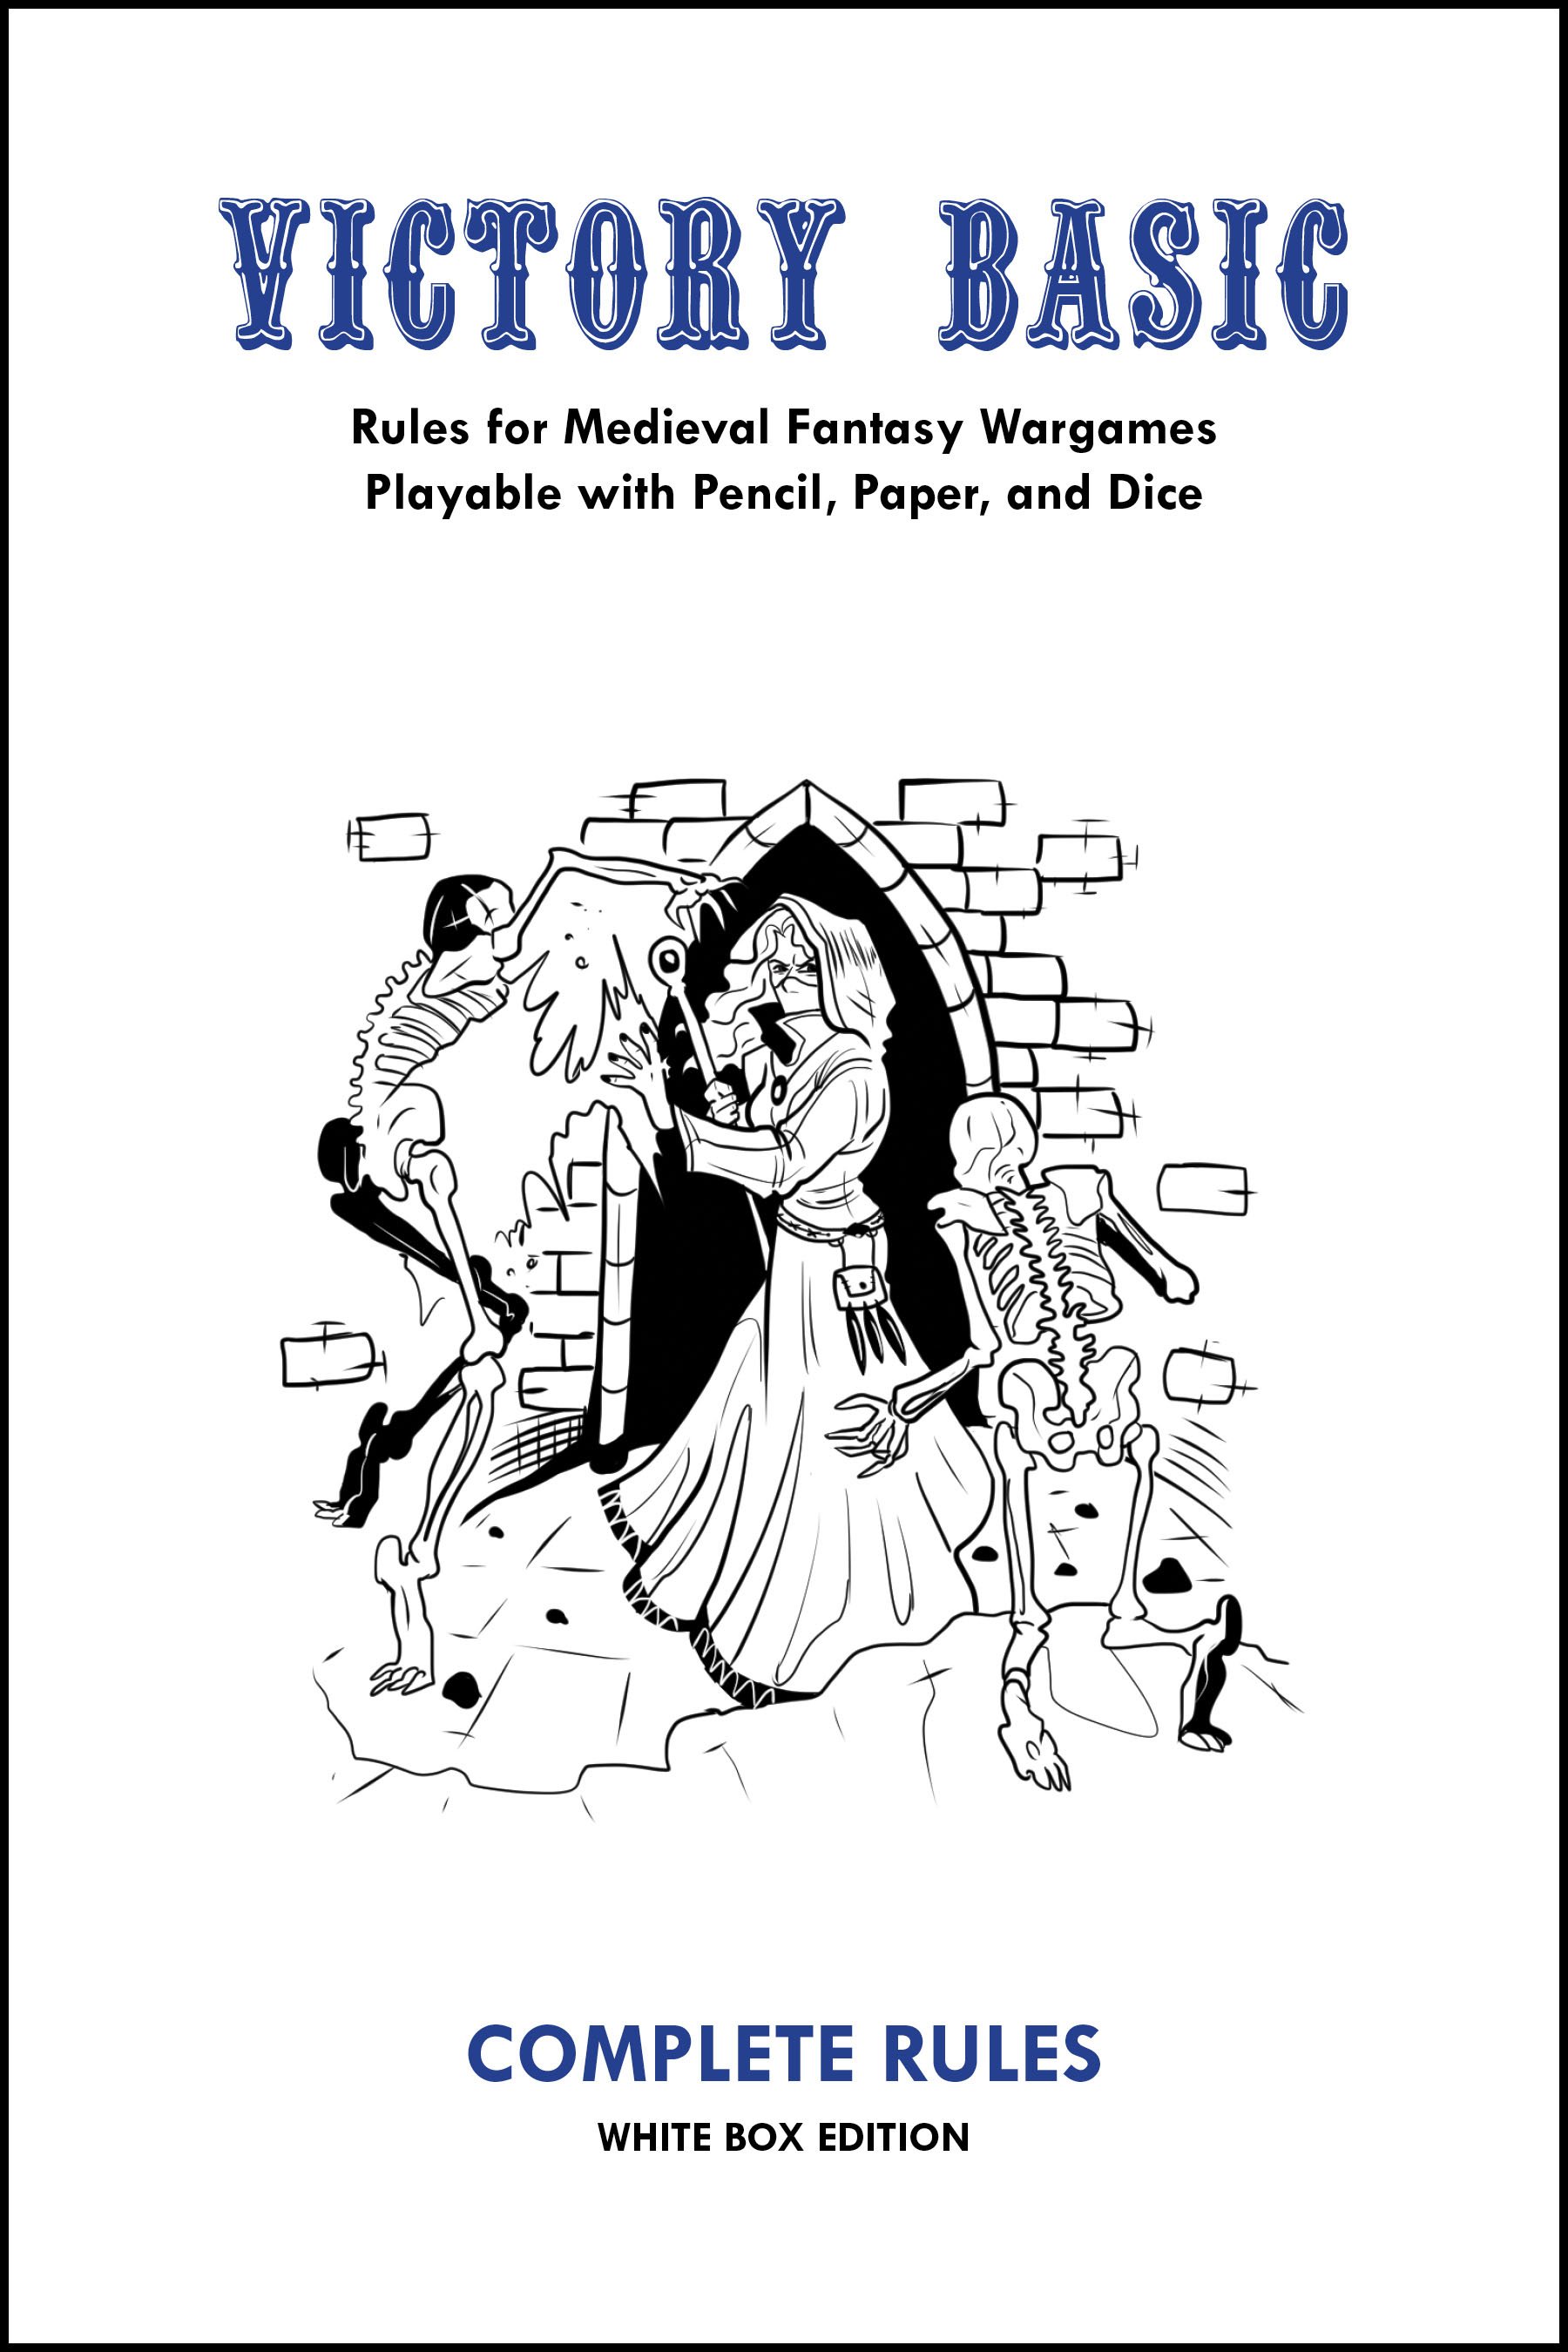 Book cover showing a half-elf sorceress emerging from a dark dungeon door and blasting skeletons with magic.